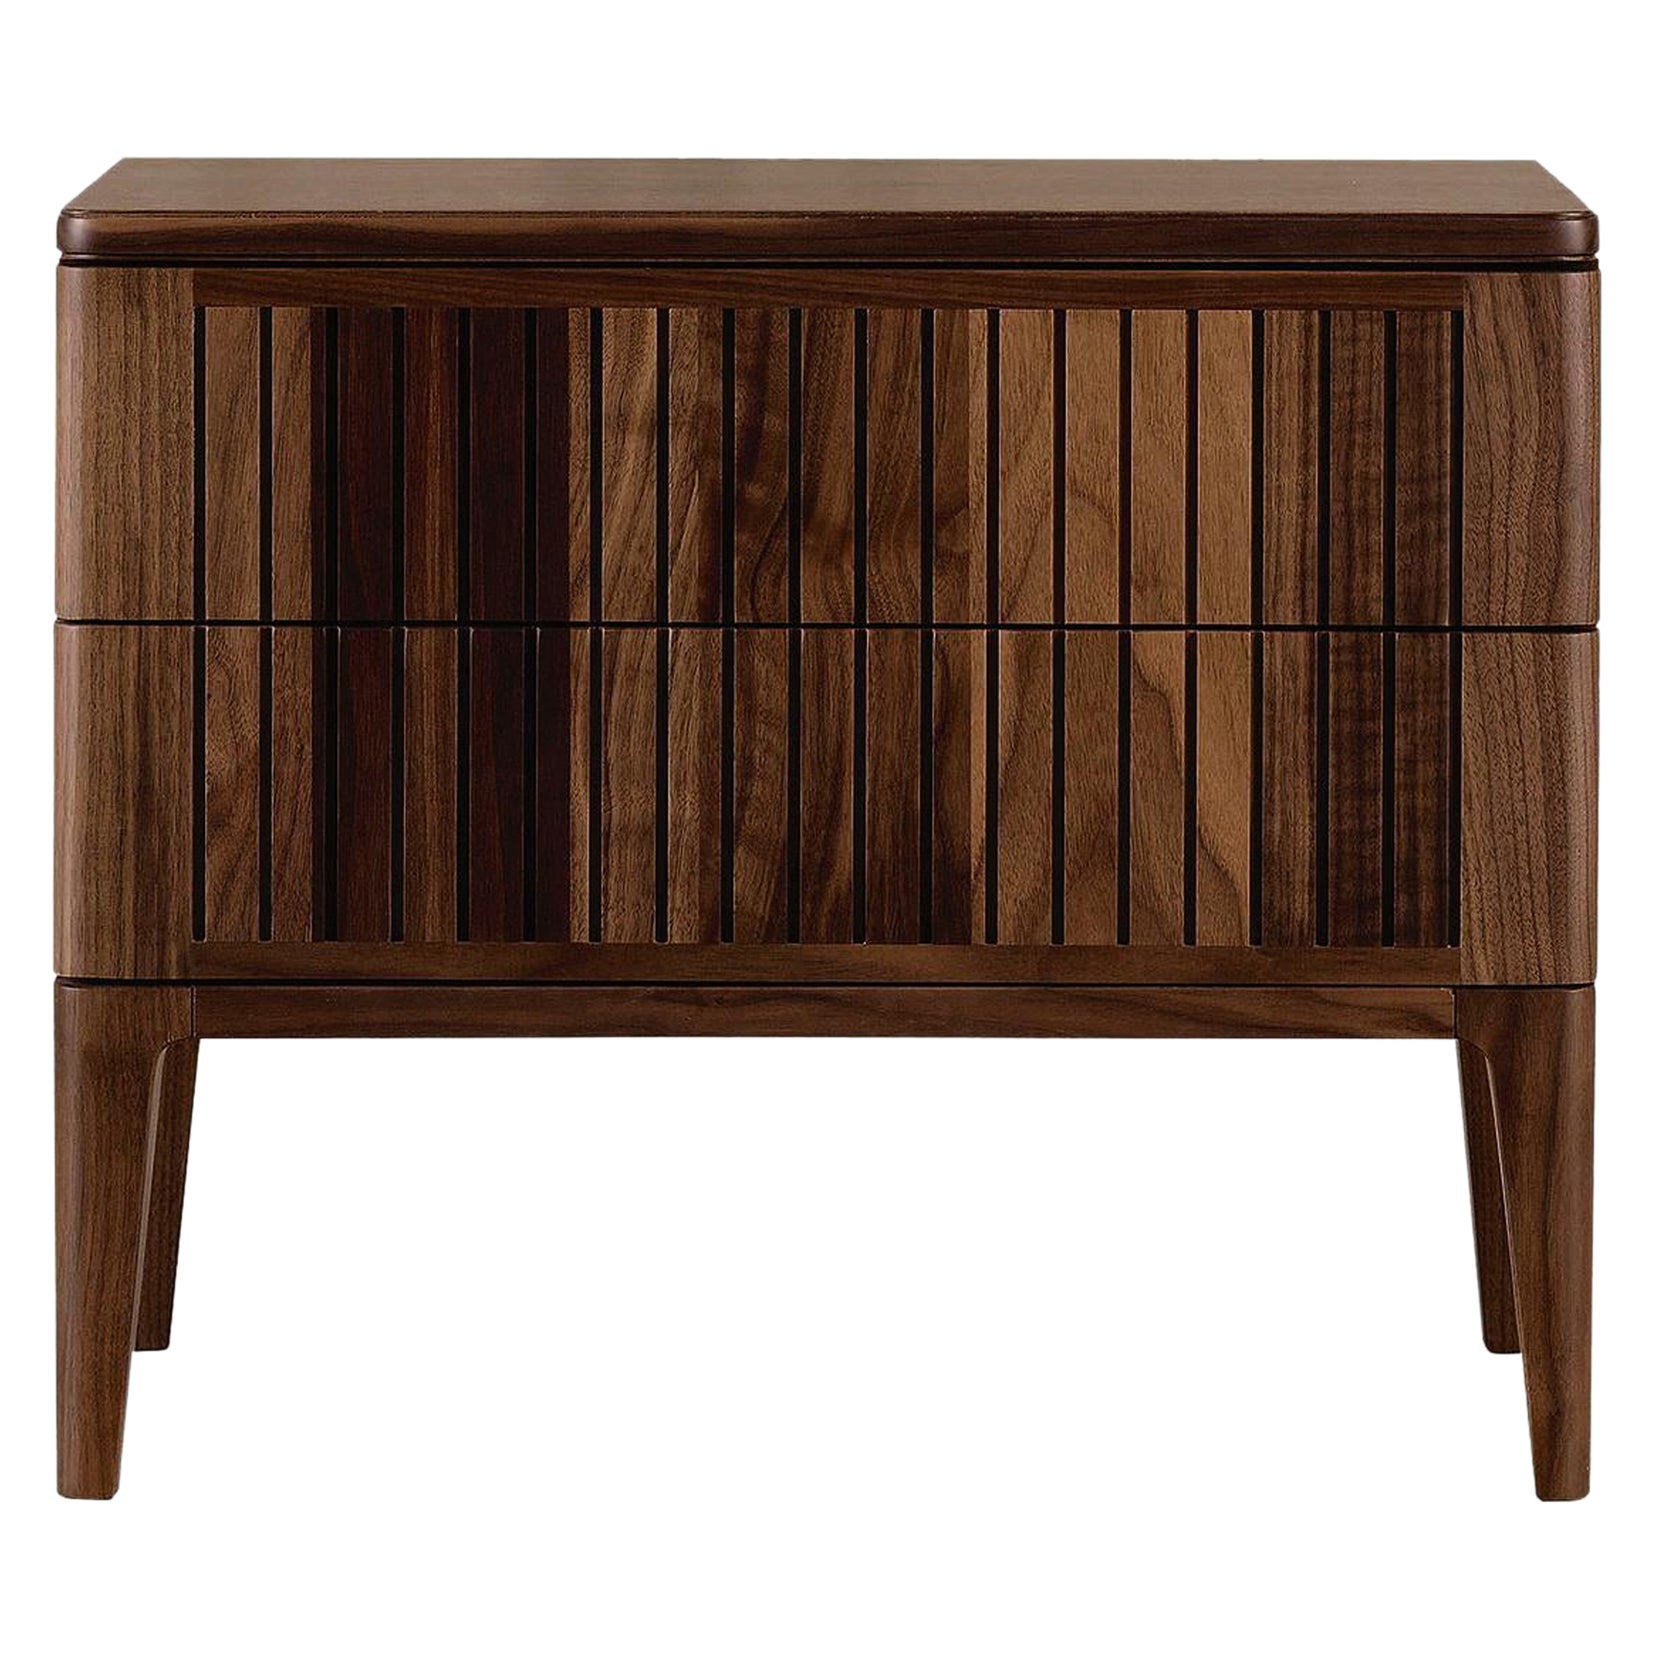 Eleva Solid Wood Bedside table, Walnut in Hand-Made Natural Finish, Contemporary For Sale